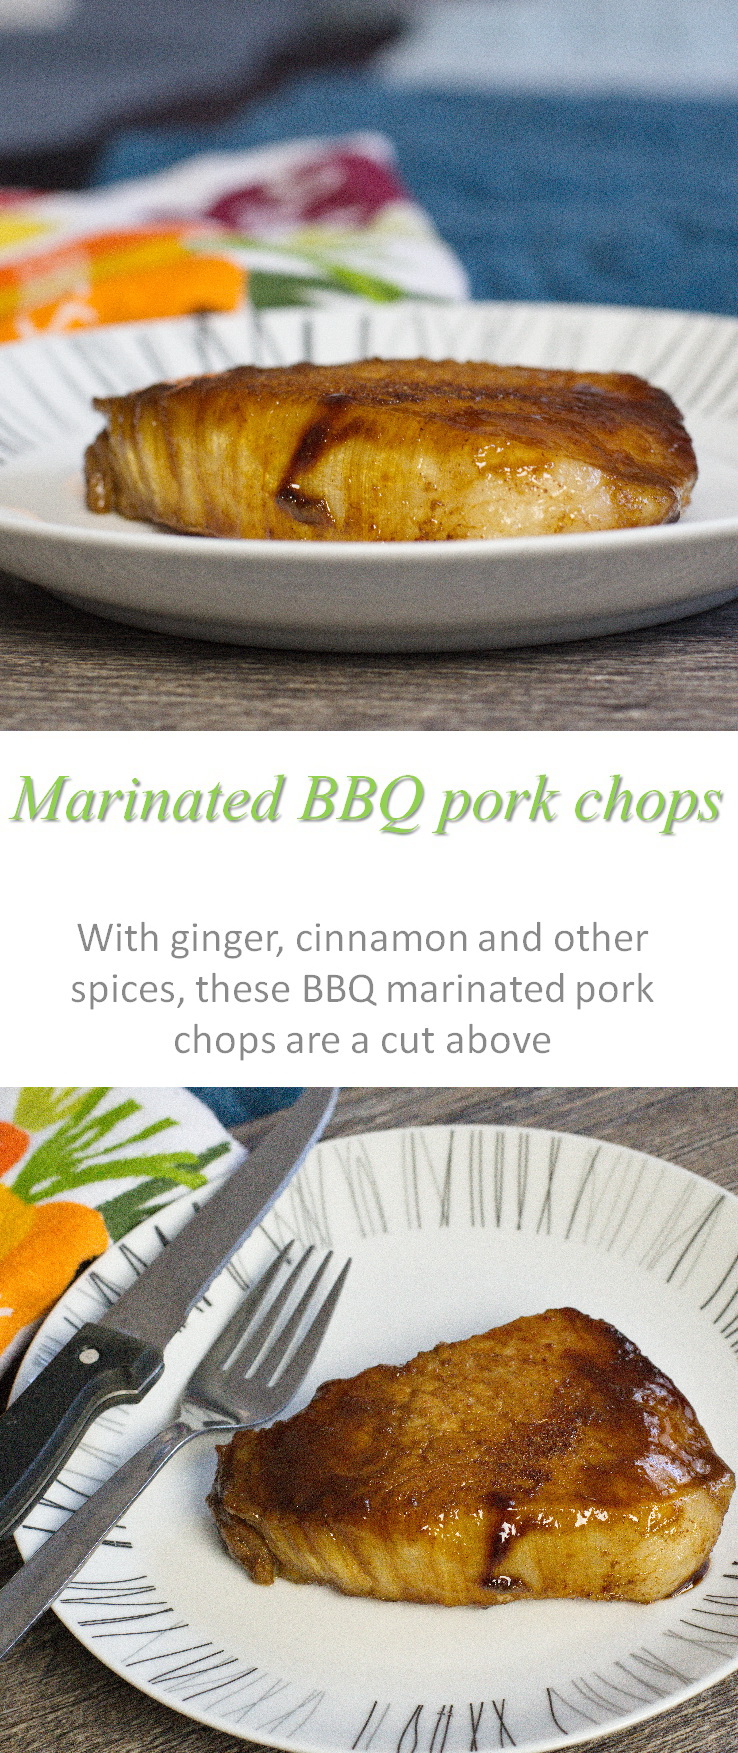 Cook at home | Pork chops with BBQ marinade - Cook at Home